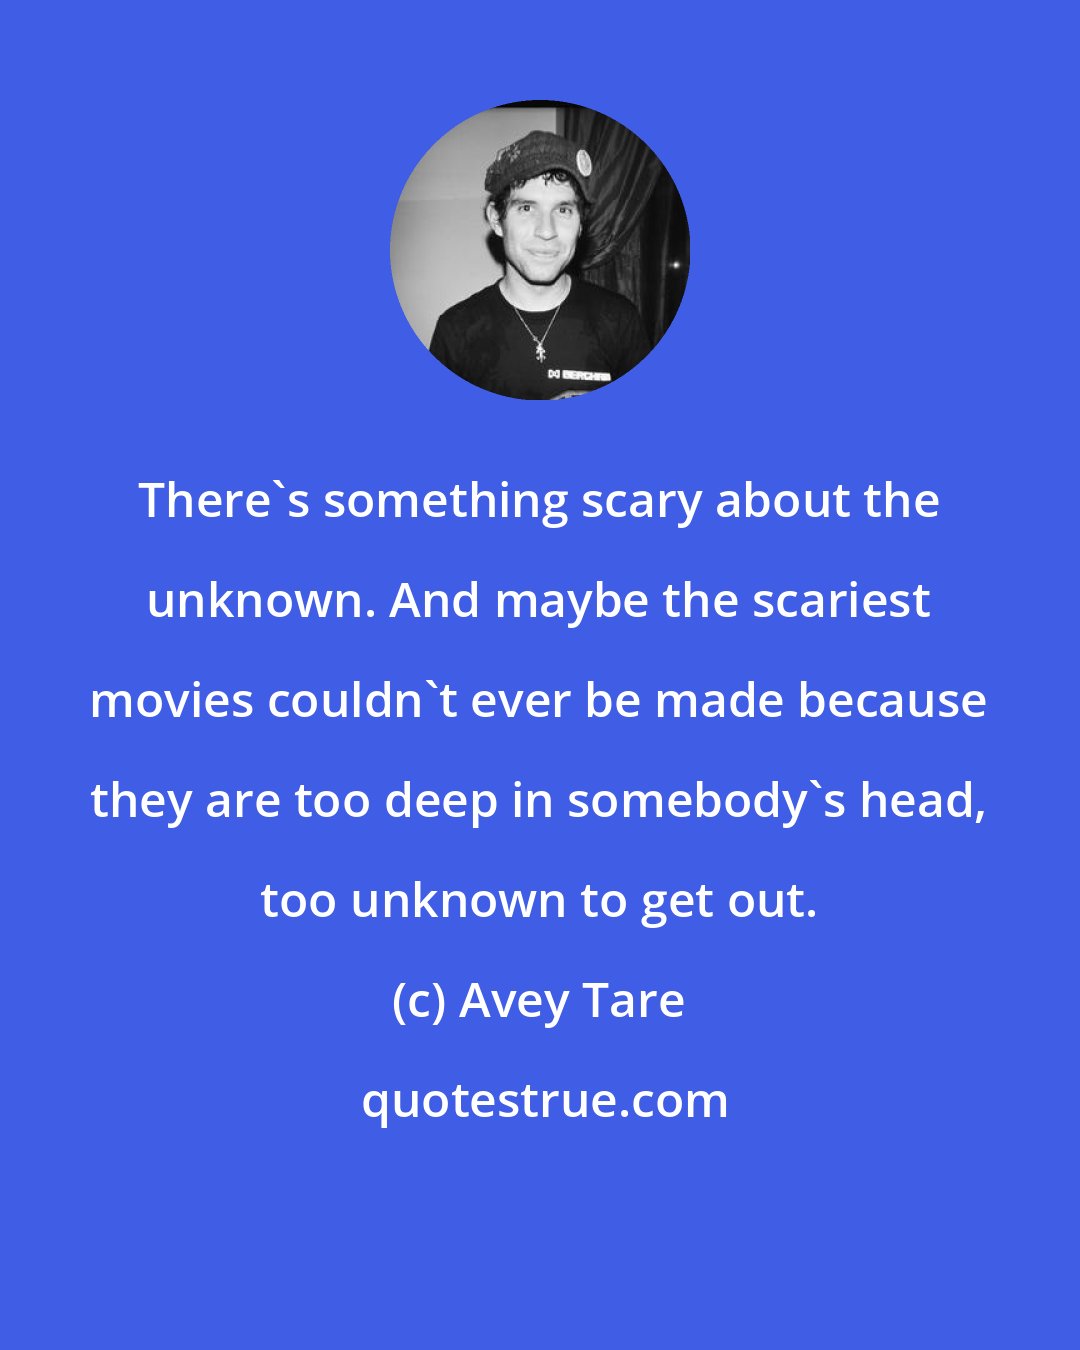 Avey Tare: There's something scary about the unknown. And maybe the scariest movies couldn't ever be made because they are too deep in somebody's head, too unknown to get out.